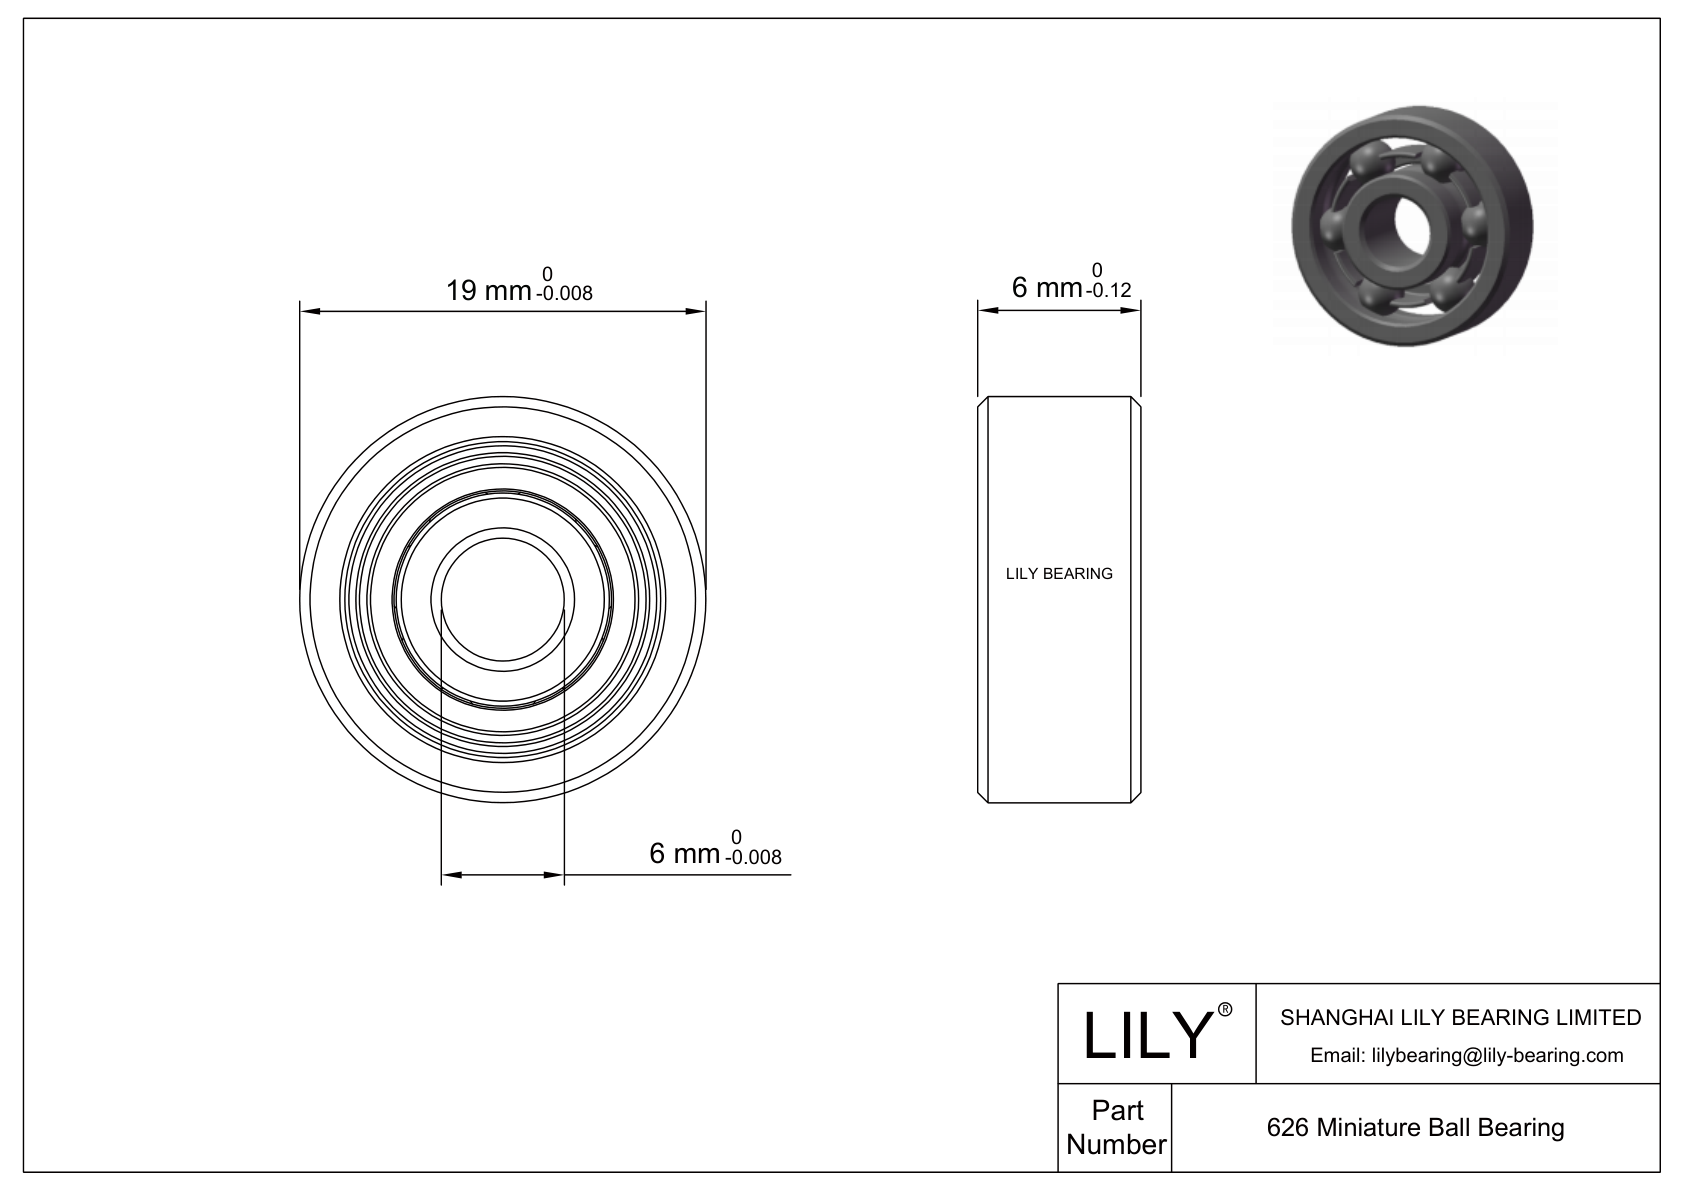 LILY-BS62624-8 POM Coated Bearing cad drawing